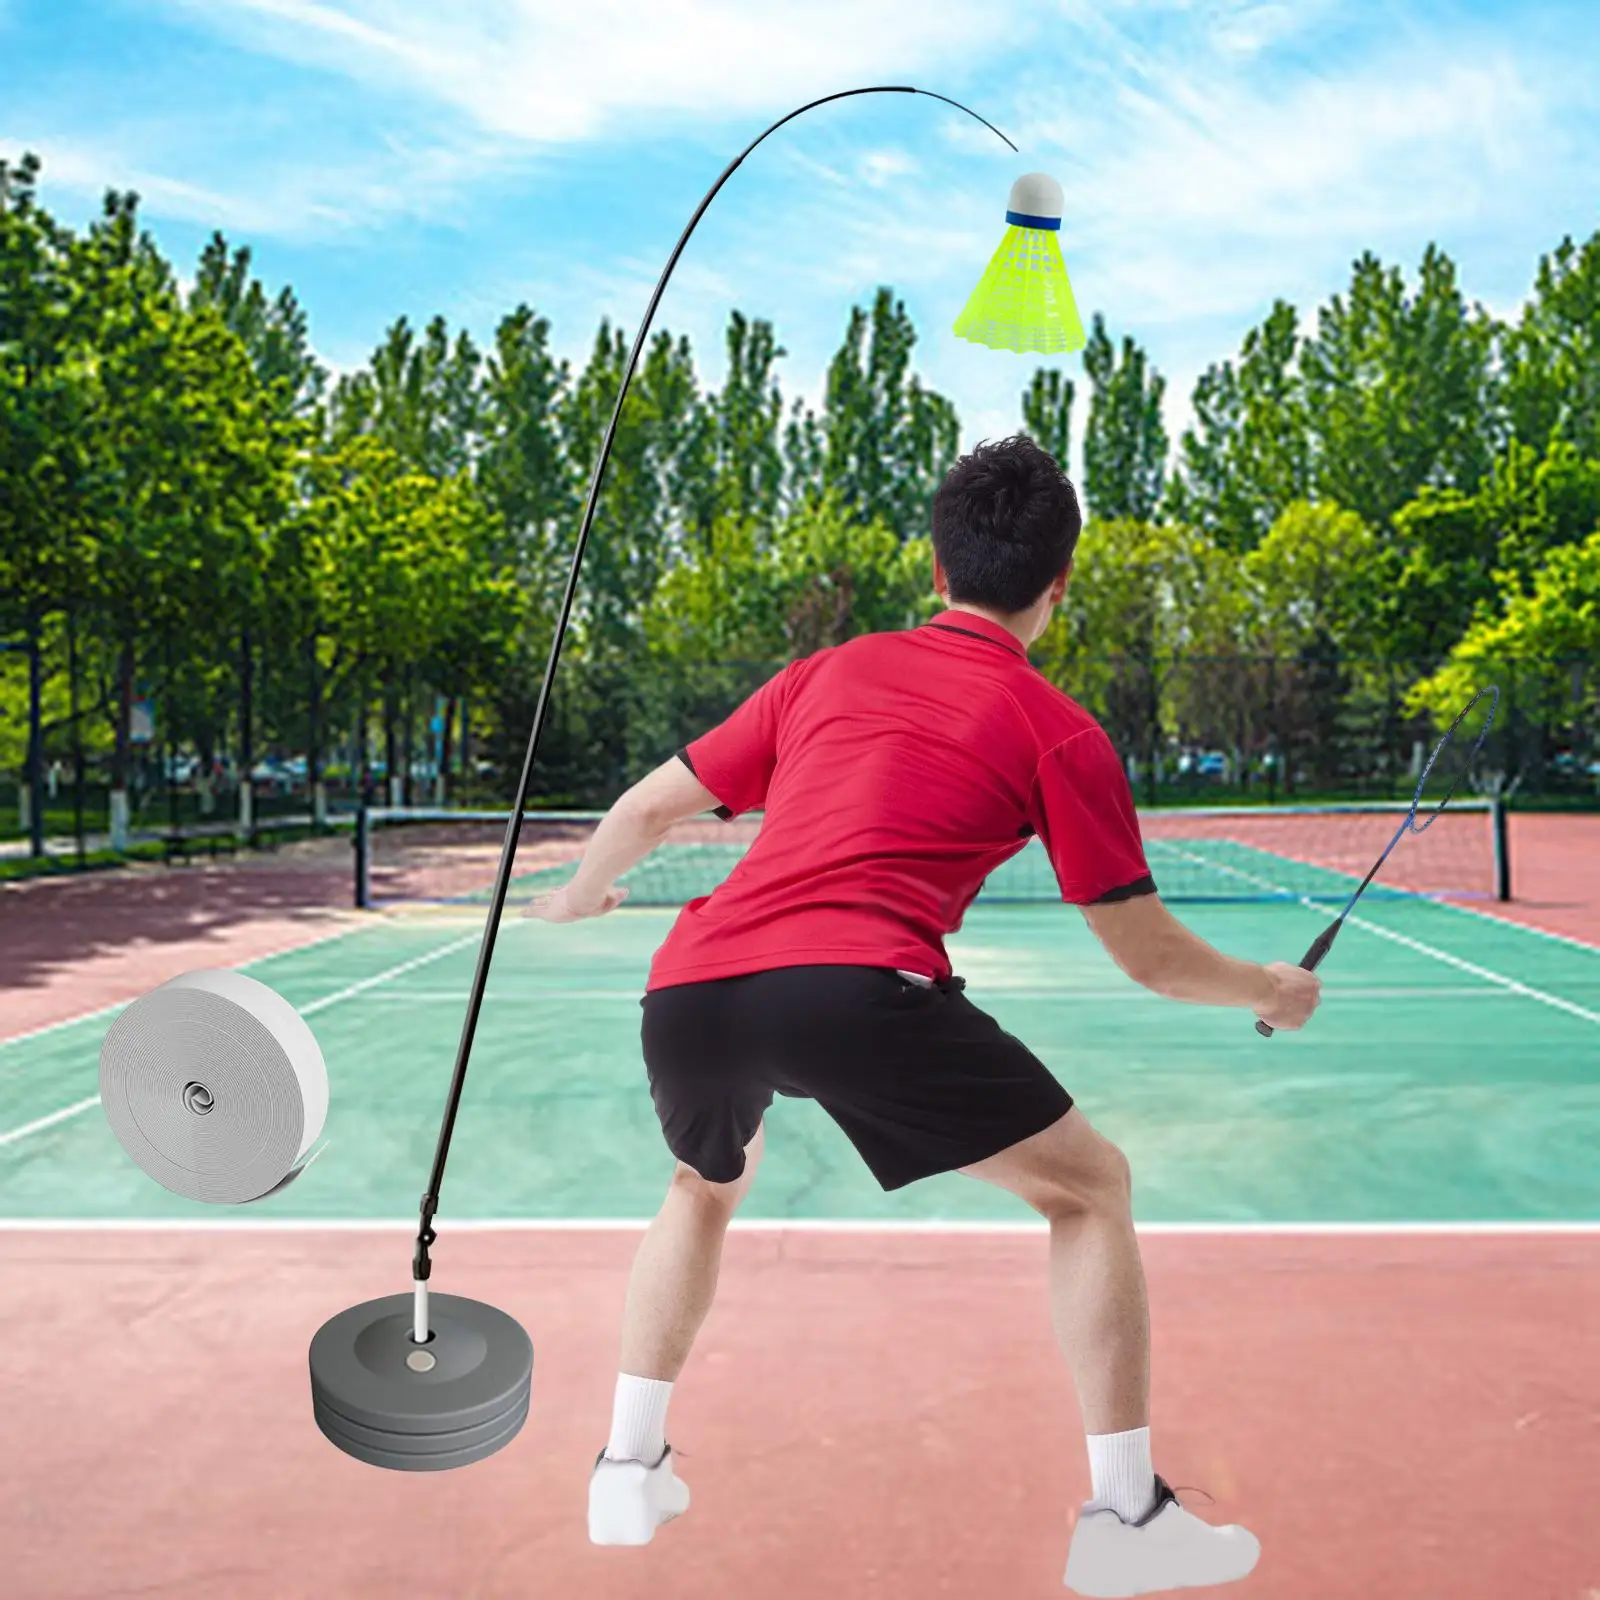 Sports Badminton Solo Exercise Equipment Portable Self Practice Tool for Kids